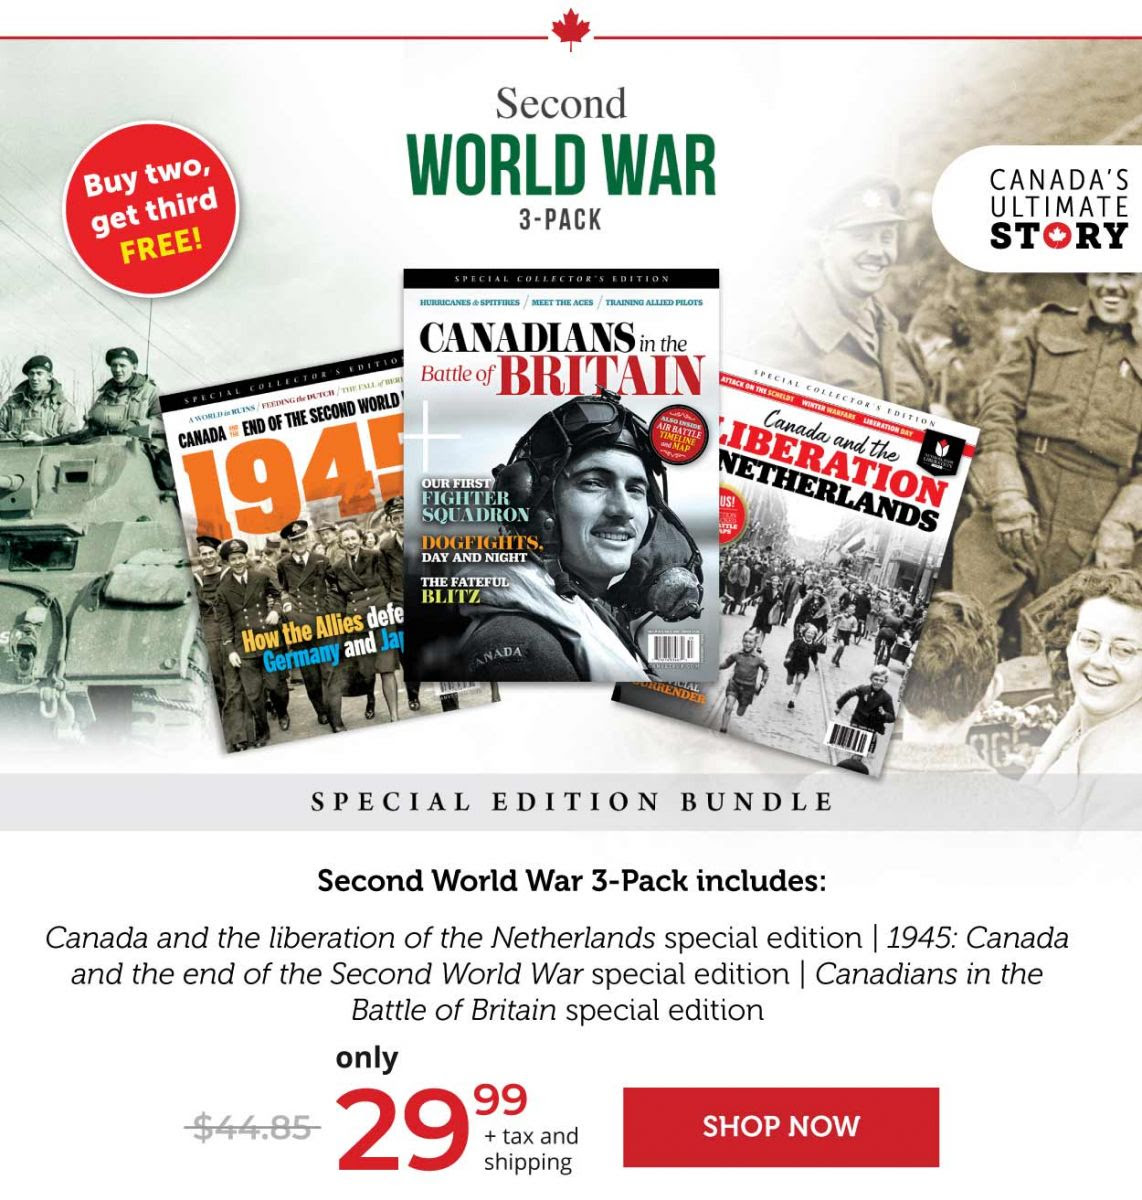 Second World War 3-pack – Buy two, get third FREE!